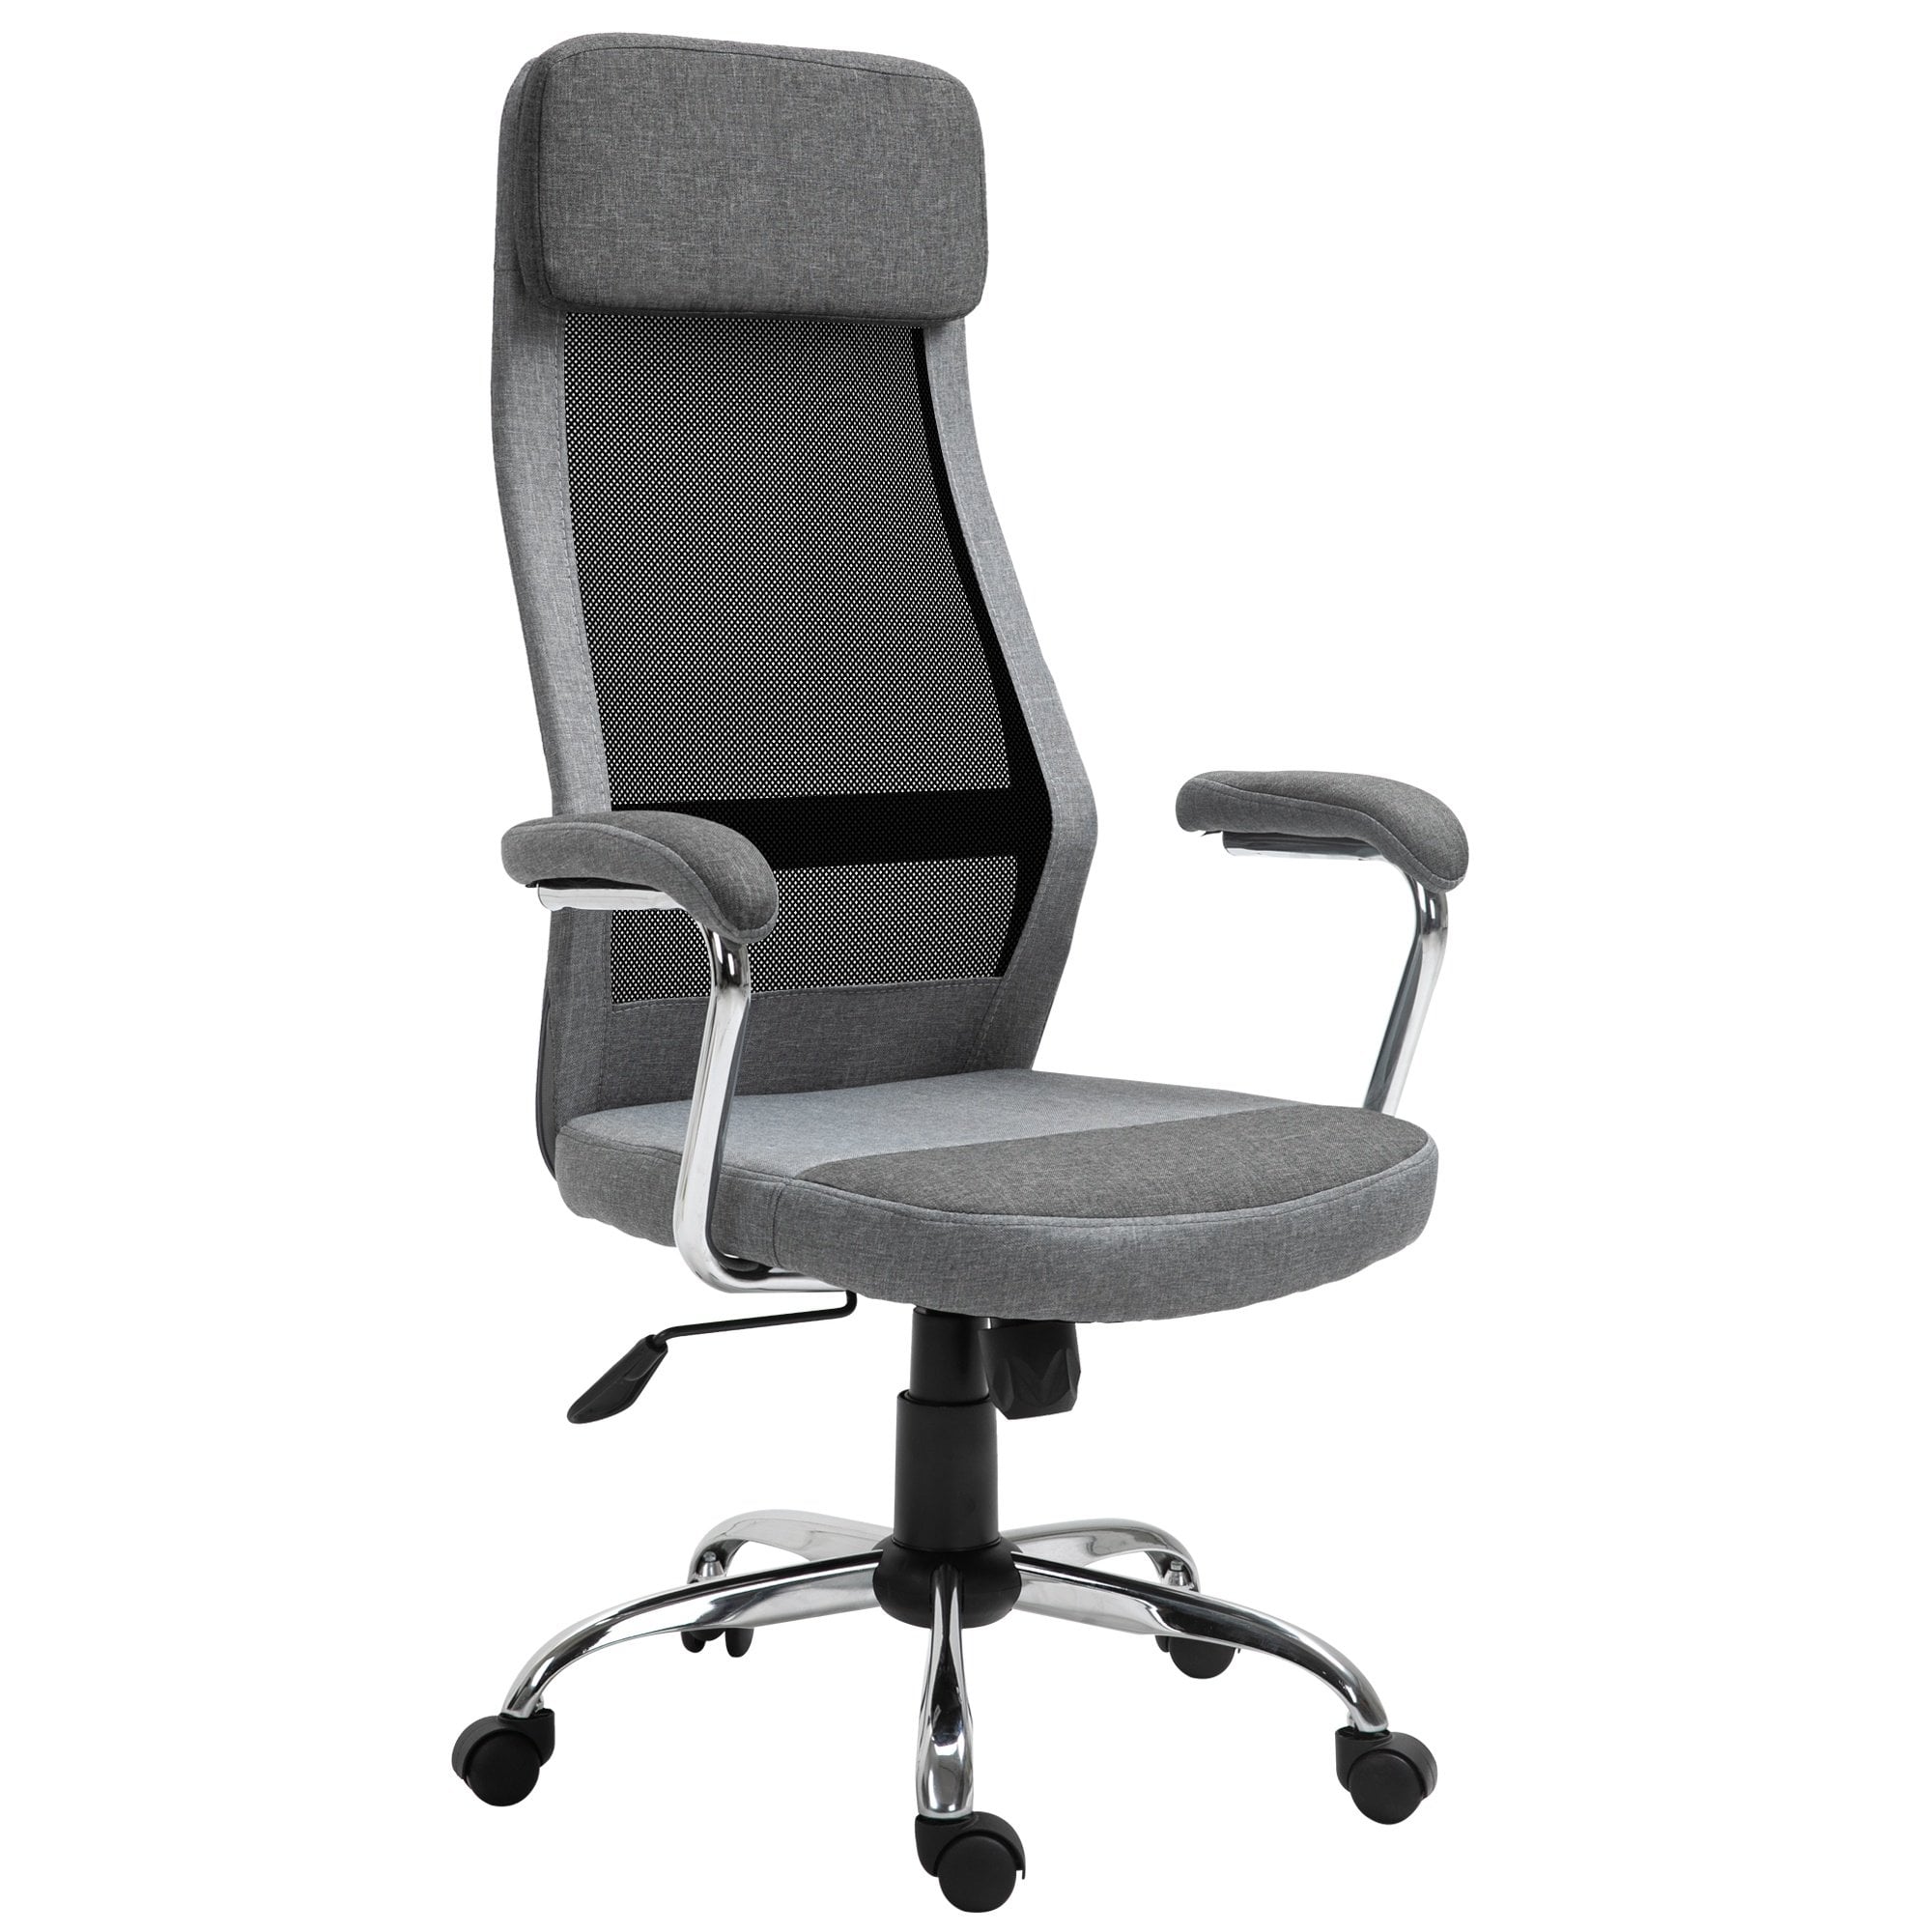 Vinsetto Office Chair Linen-Feel Mesh Fabric High Back Swivel Computer Task Desk Chair for Home with Arm - Wheels - Grey - CARTER  | TJ Hughes